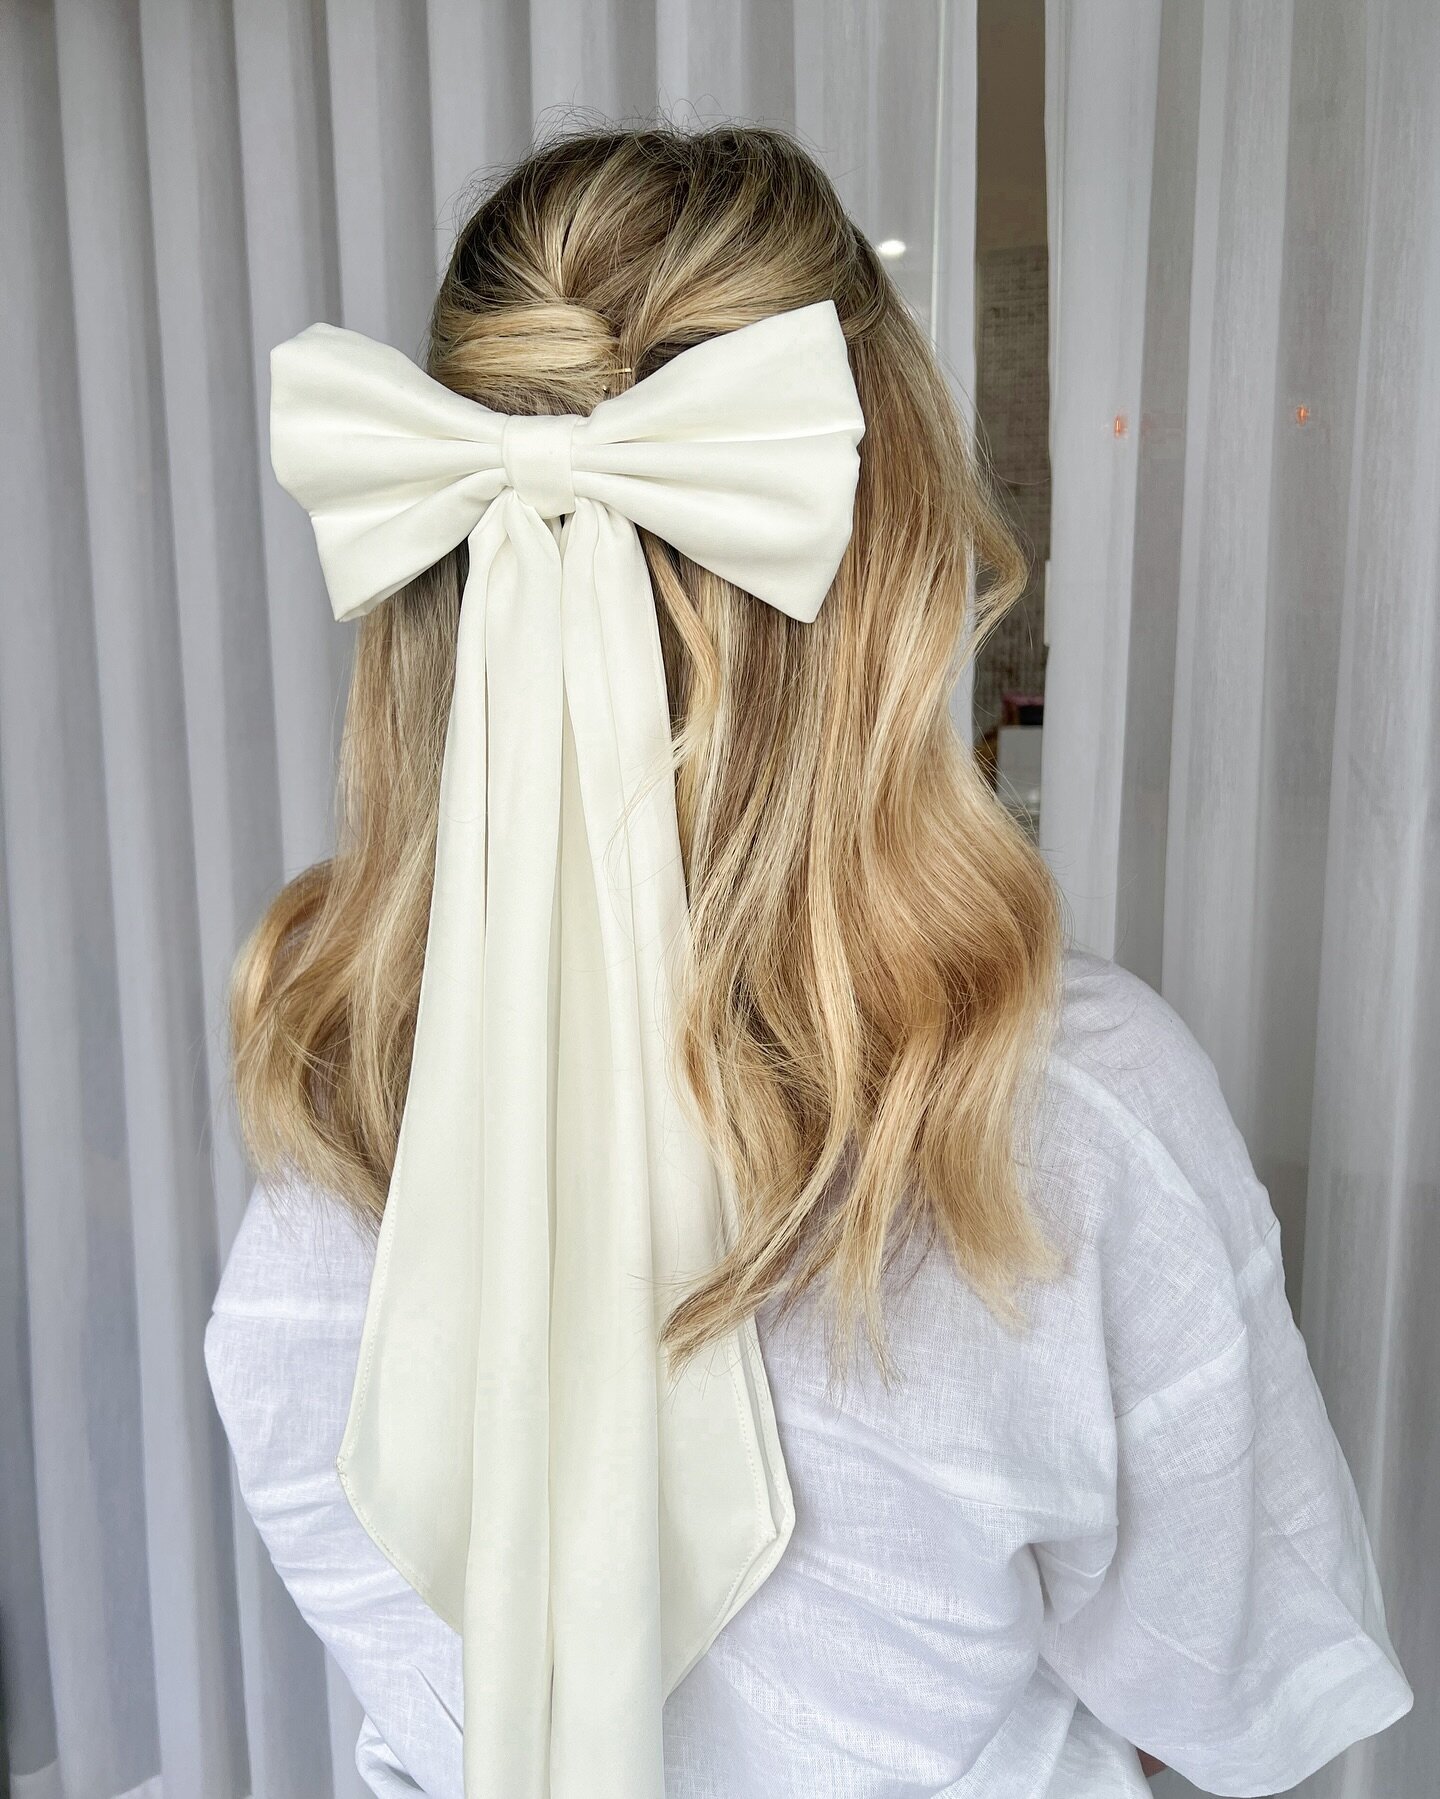 &ldquo;Feeling bow-tiful with these blonde waves 🎀✨ 
hens party vibes 🥂
.
.
#HairGoals #Bowtiful&rdquo;